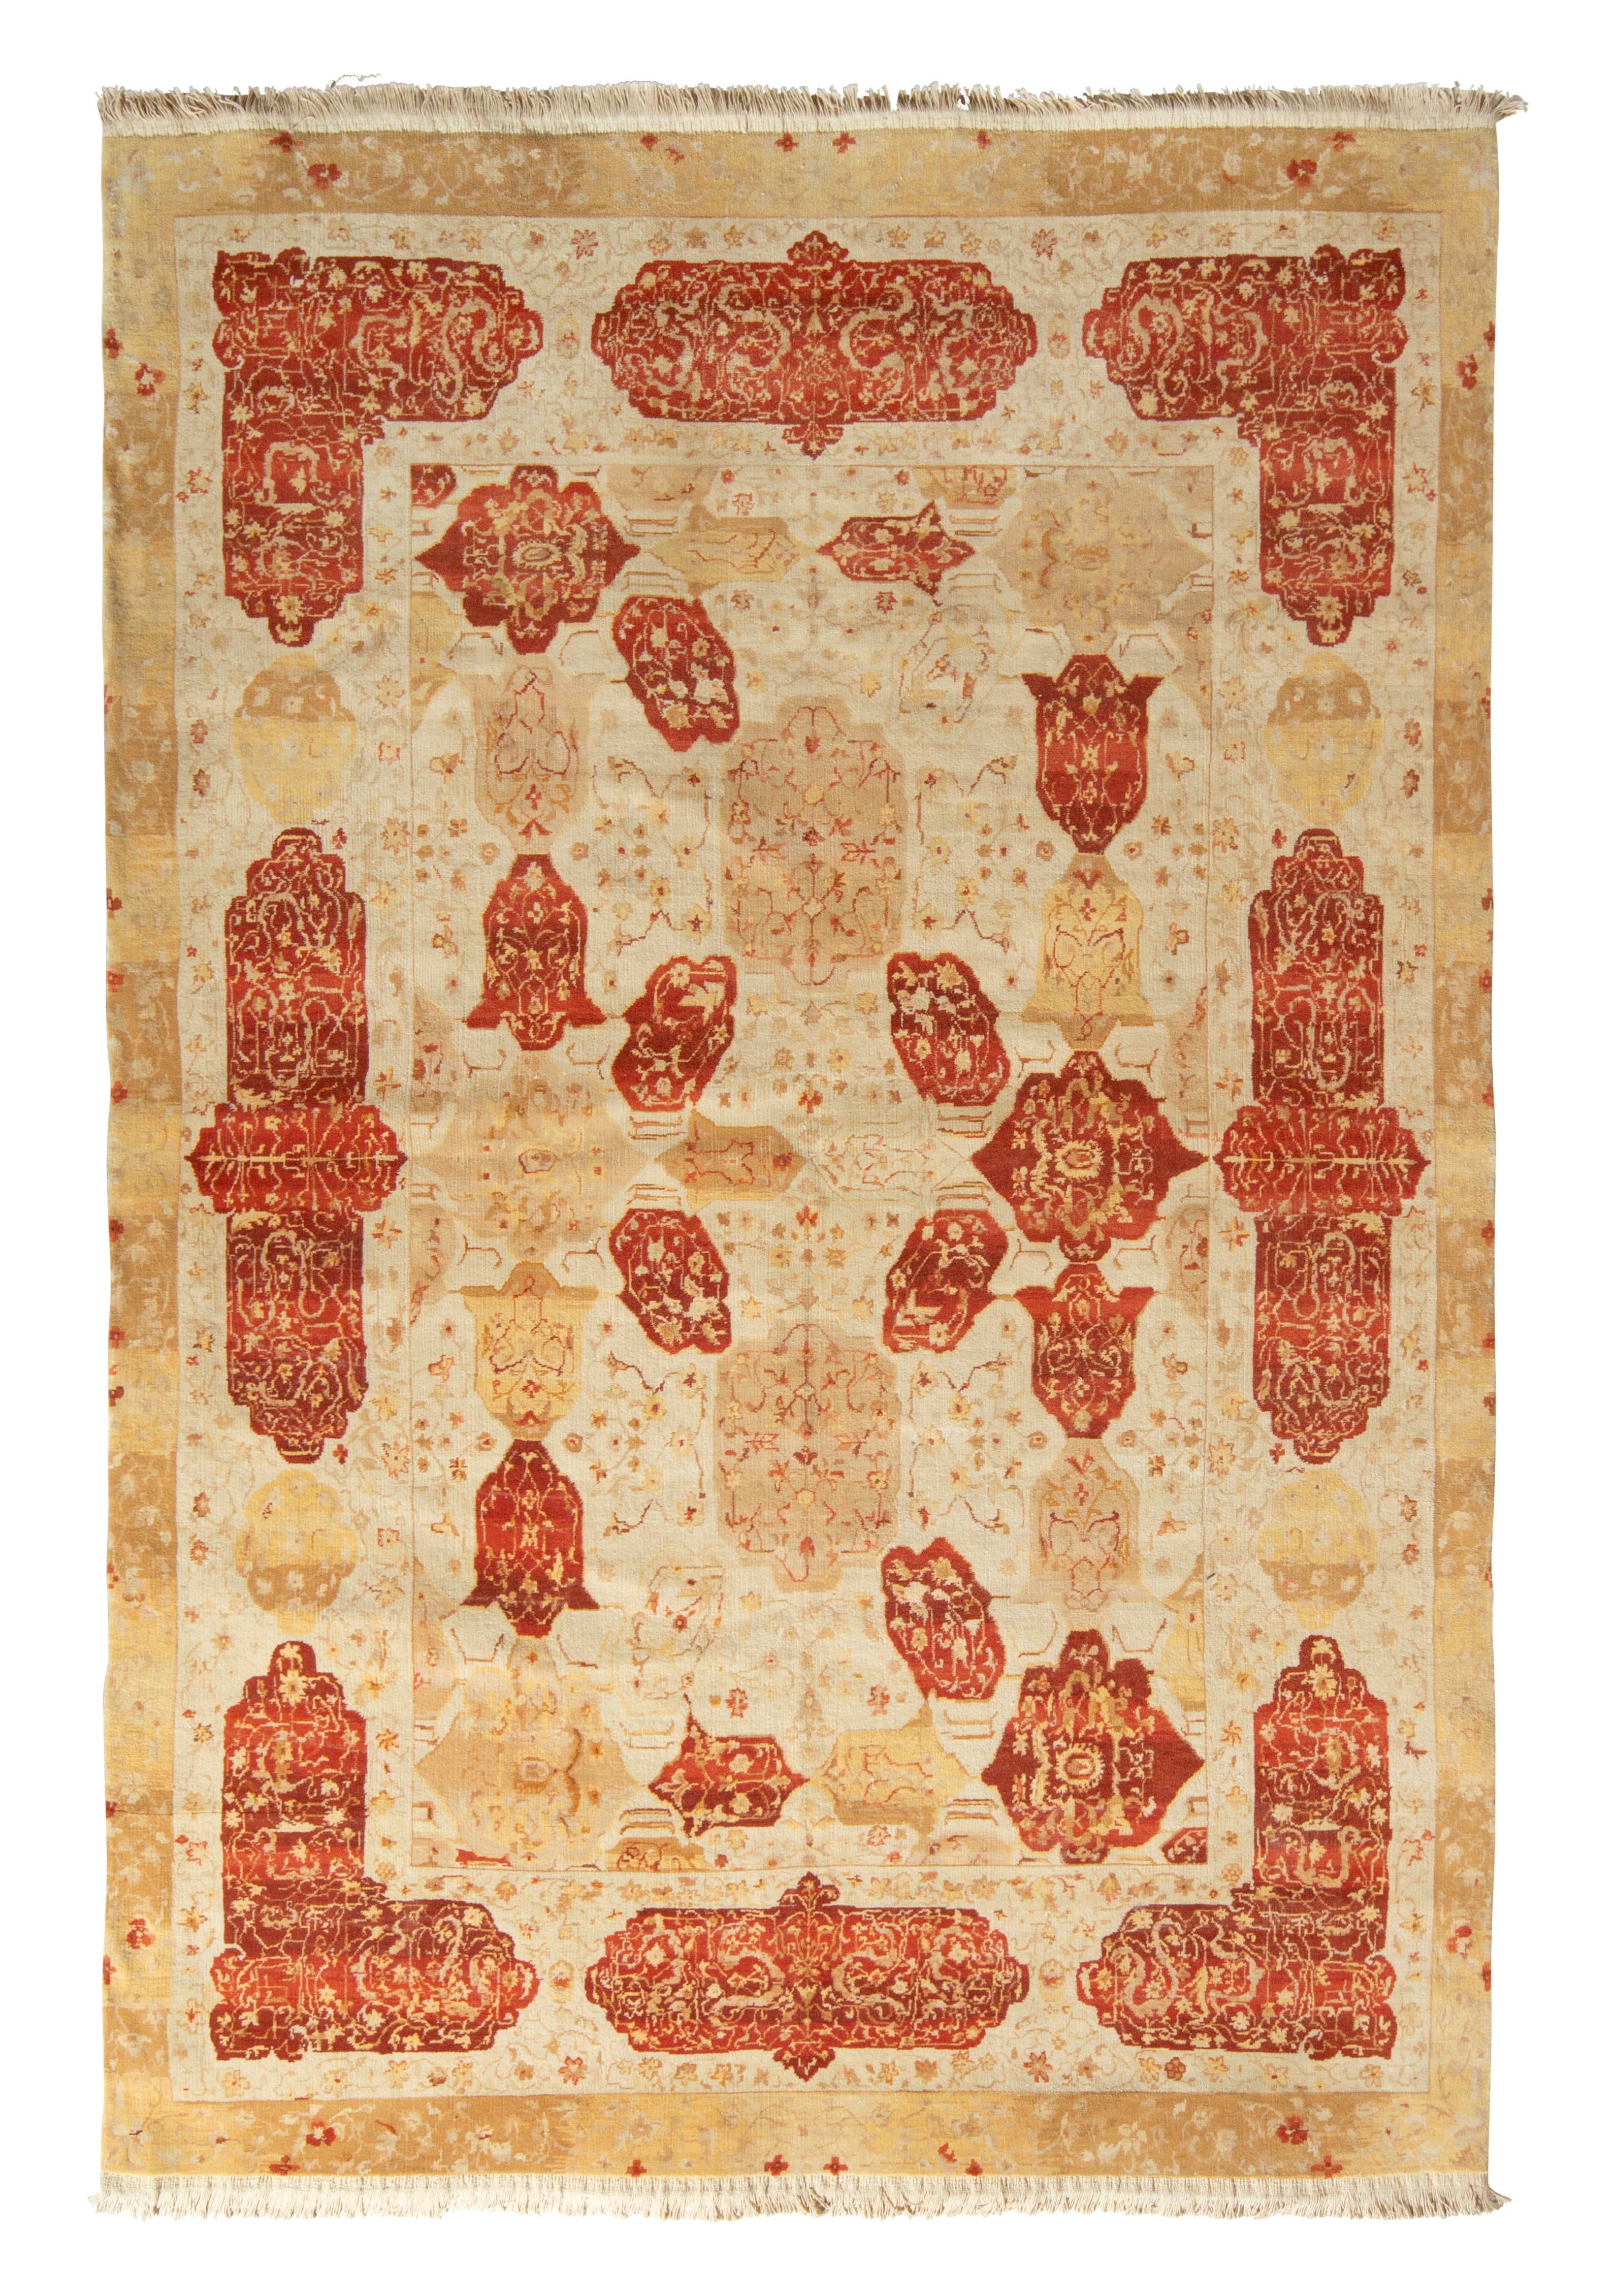 Rug & Kilim’s Classic Agra style rug in Beige-Brown and Red Floral Cartouches